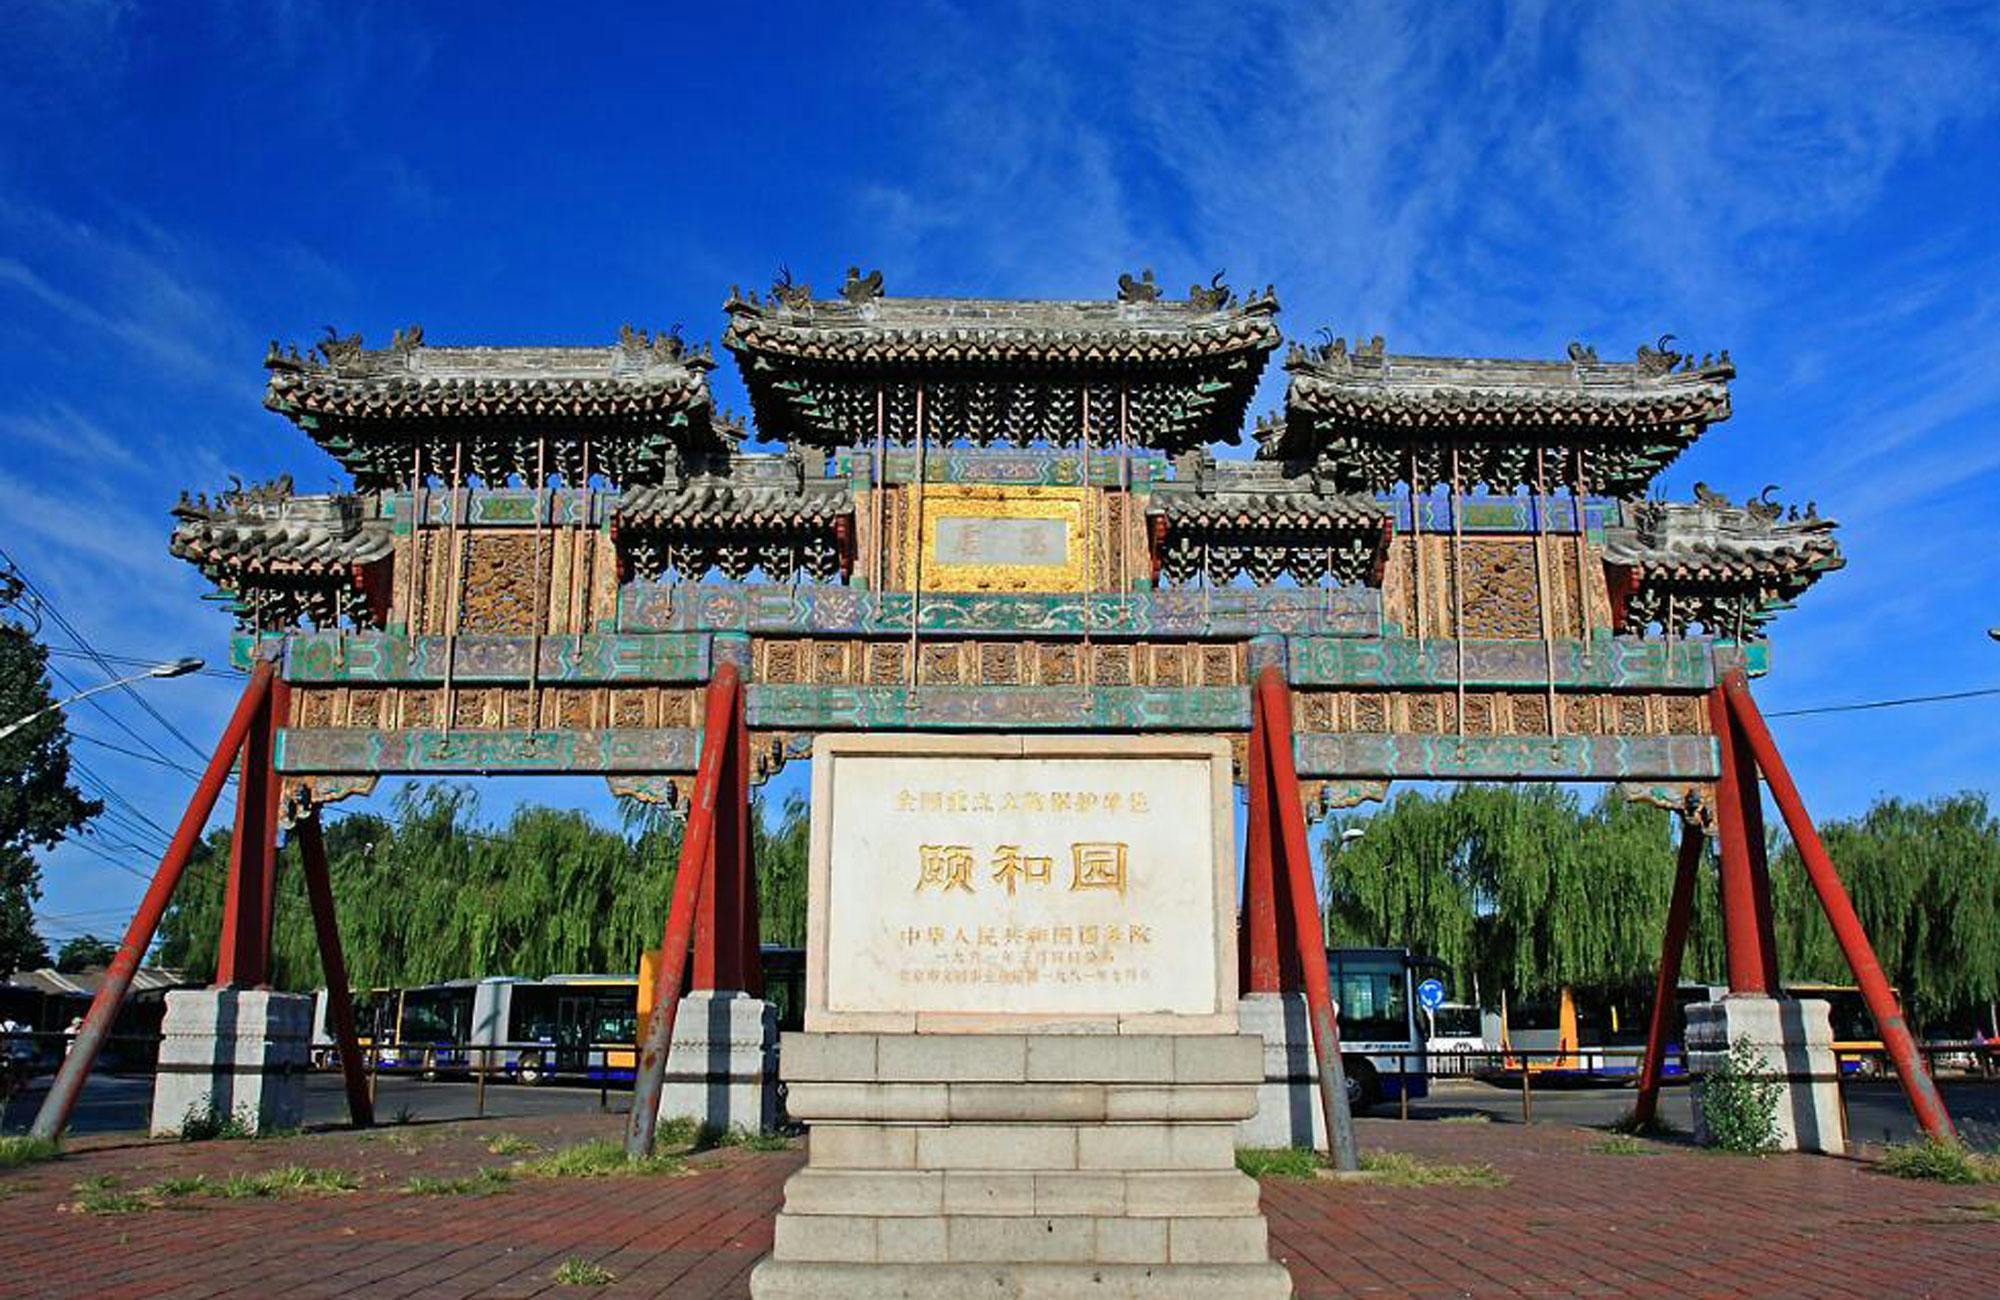 Beijing private tour of Mutianyu Great Wall and Summer Palace in Musement